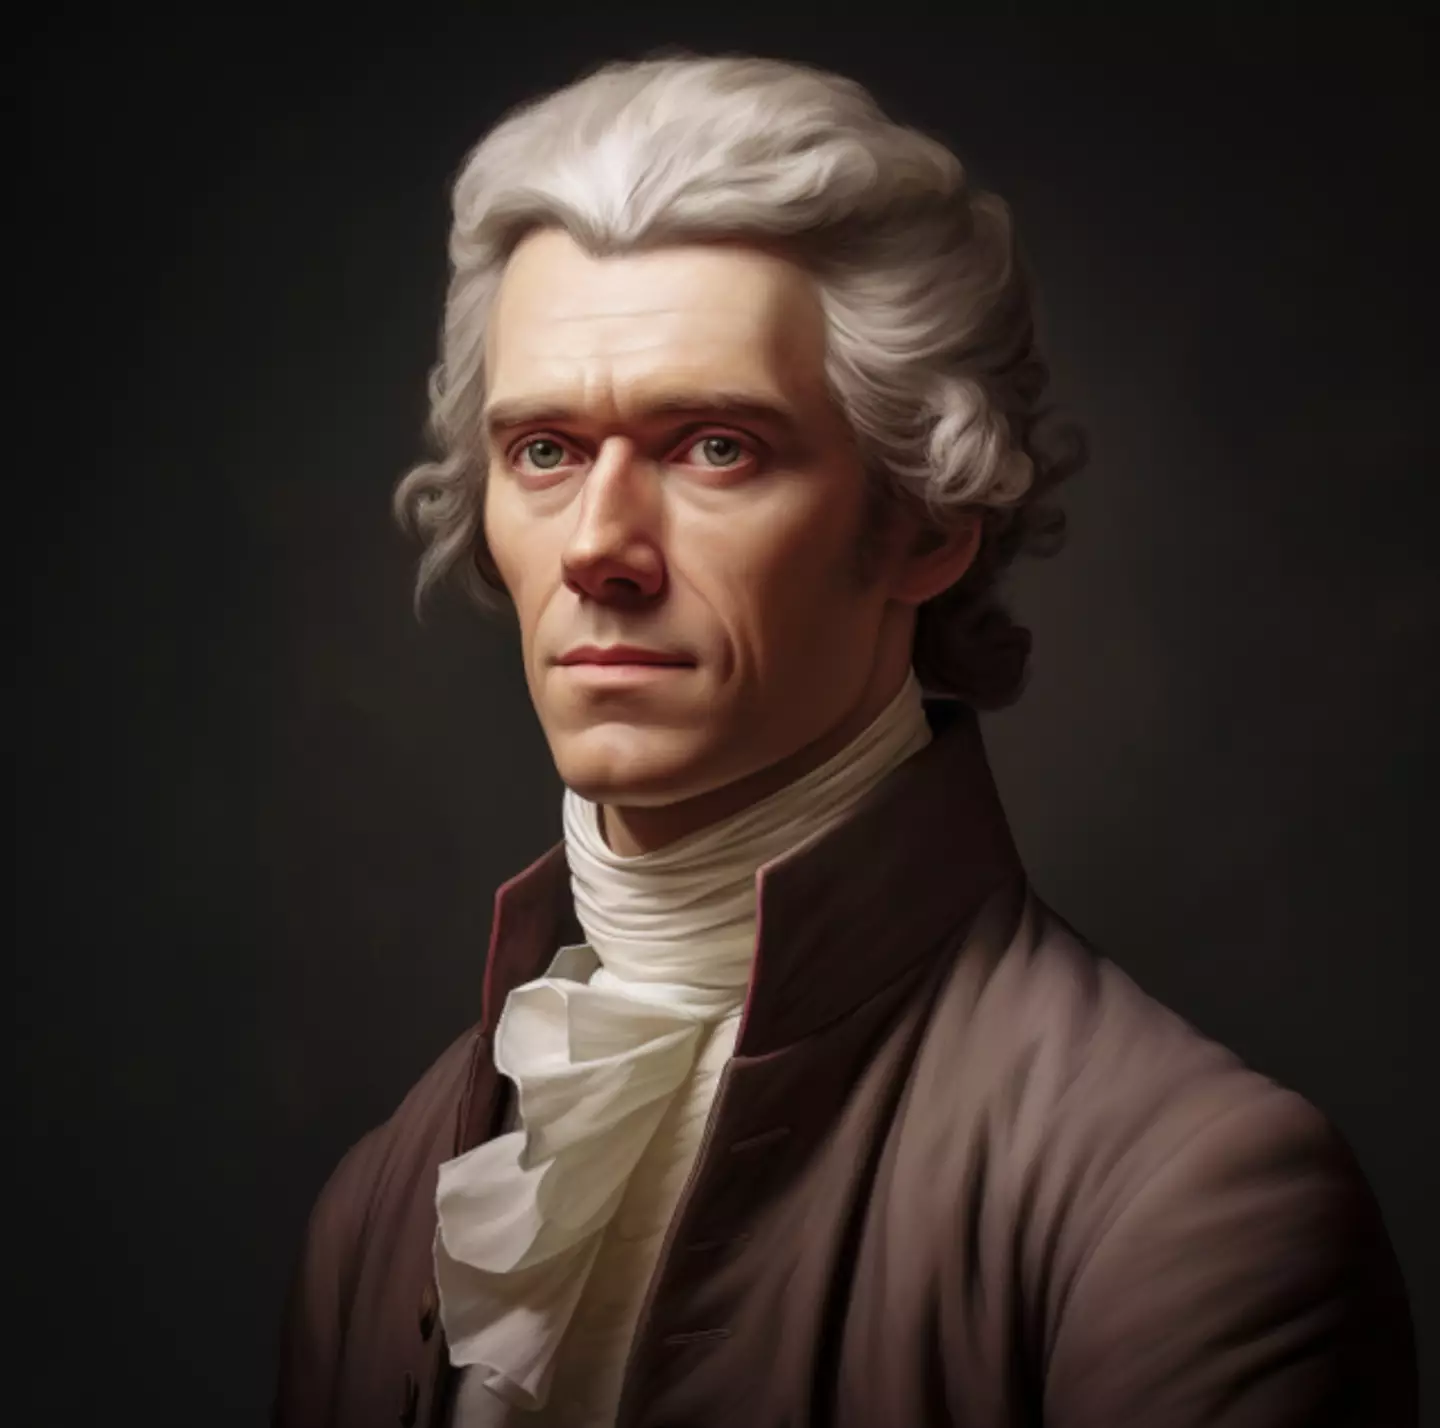 This is apparently Hugh Laurie playing Thomas Jefferson.